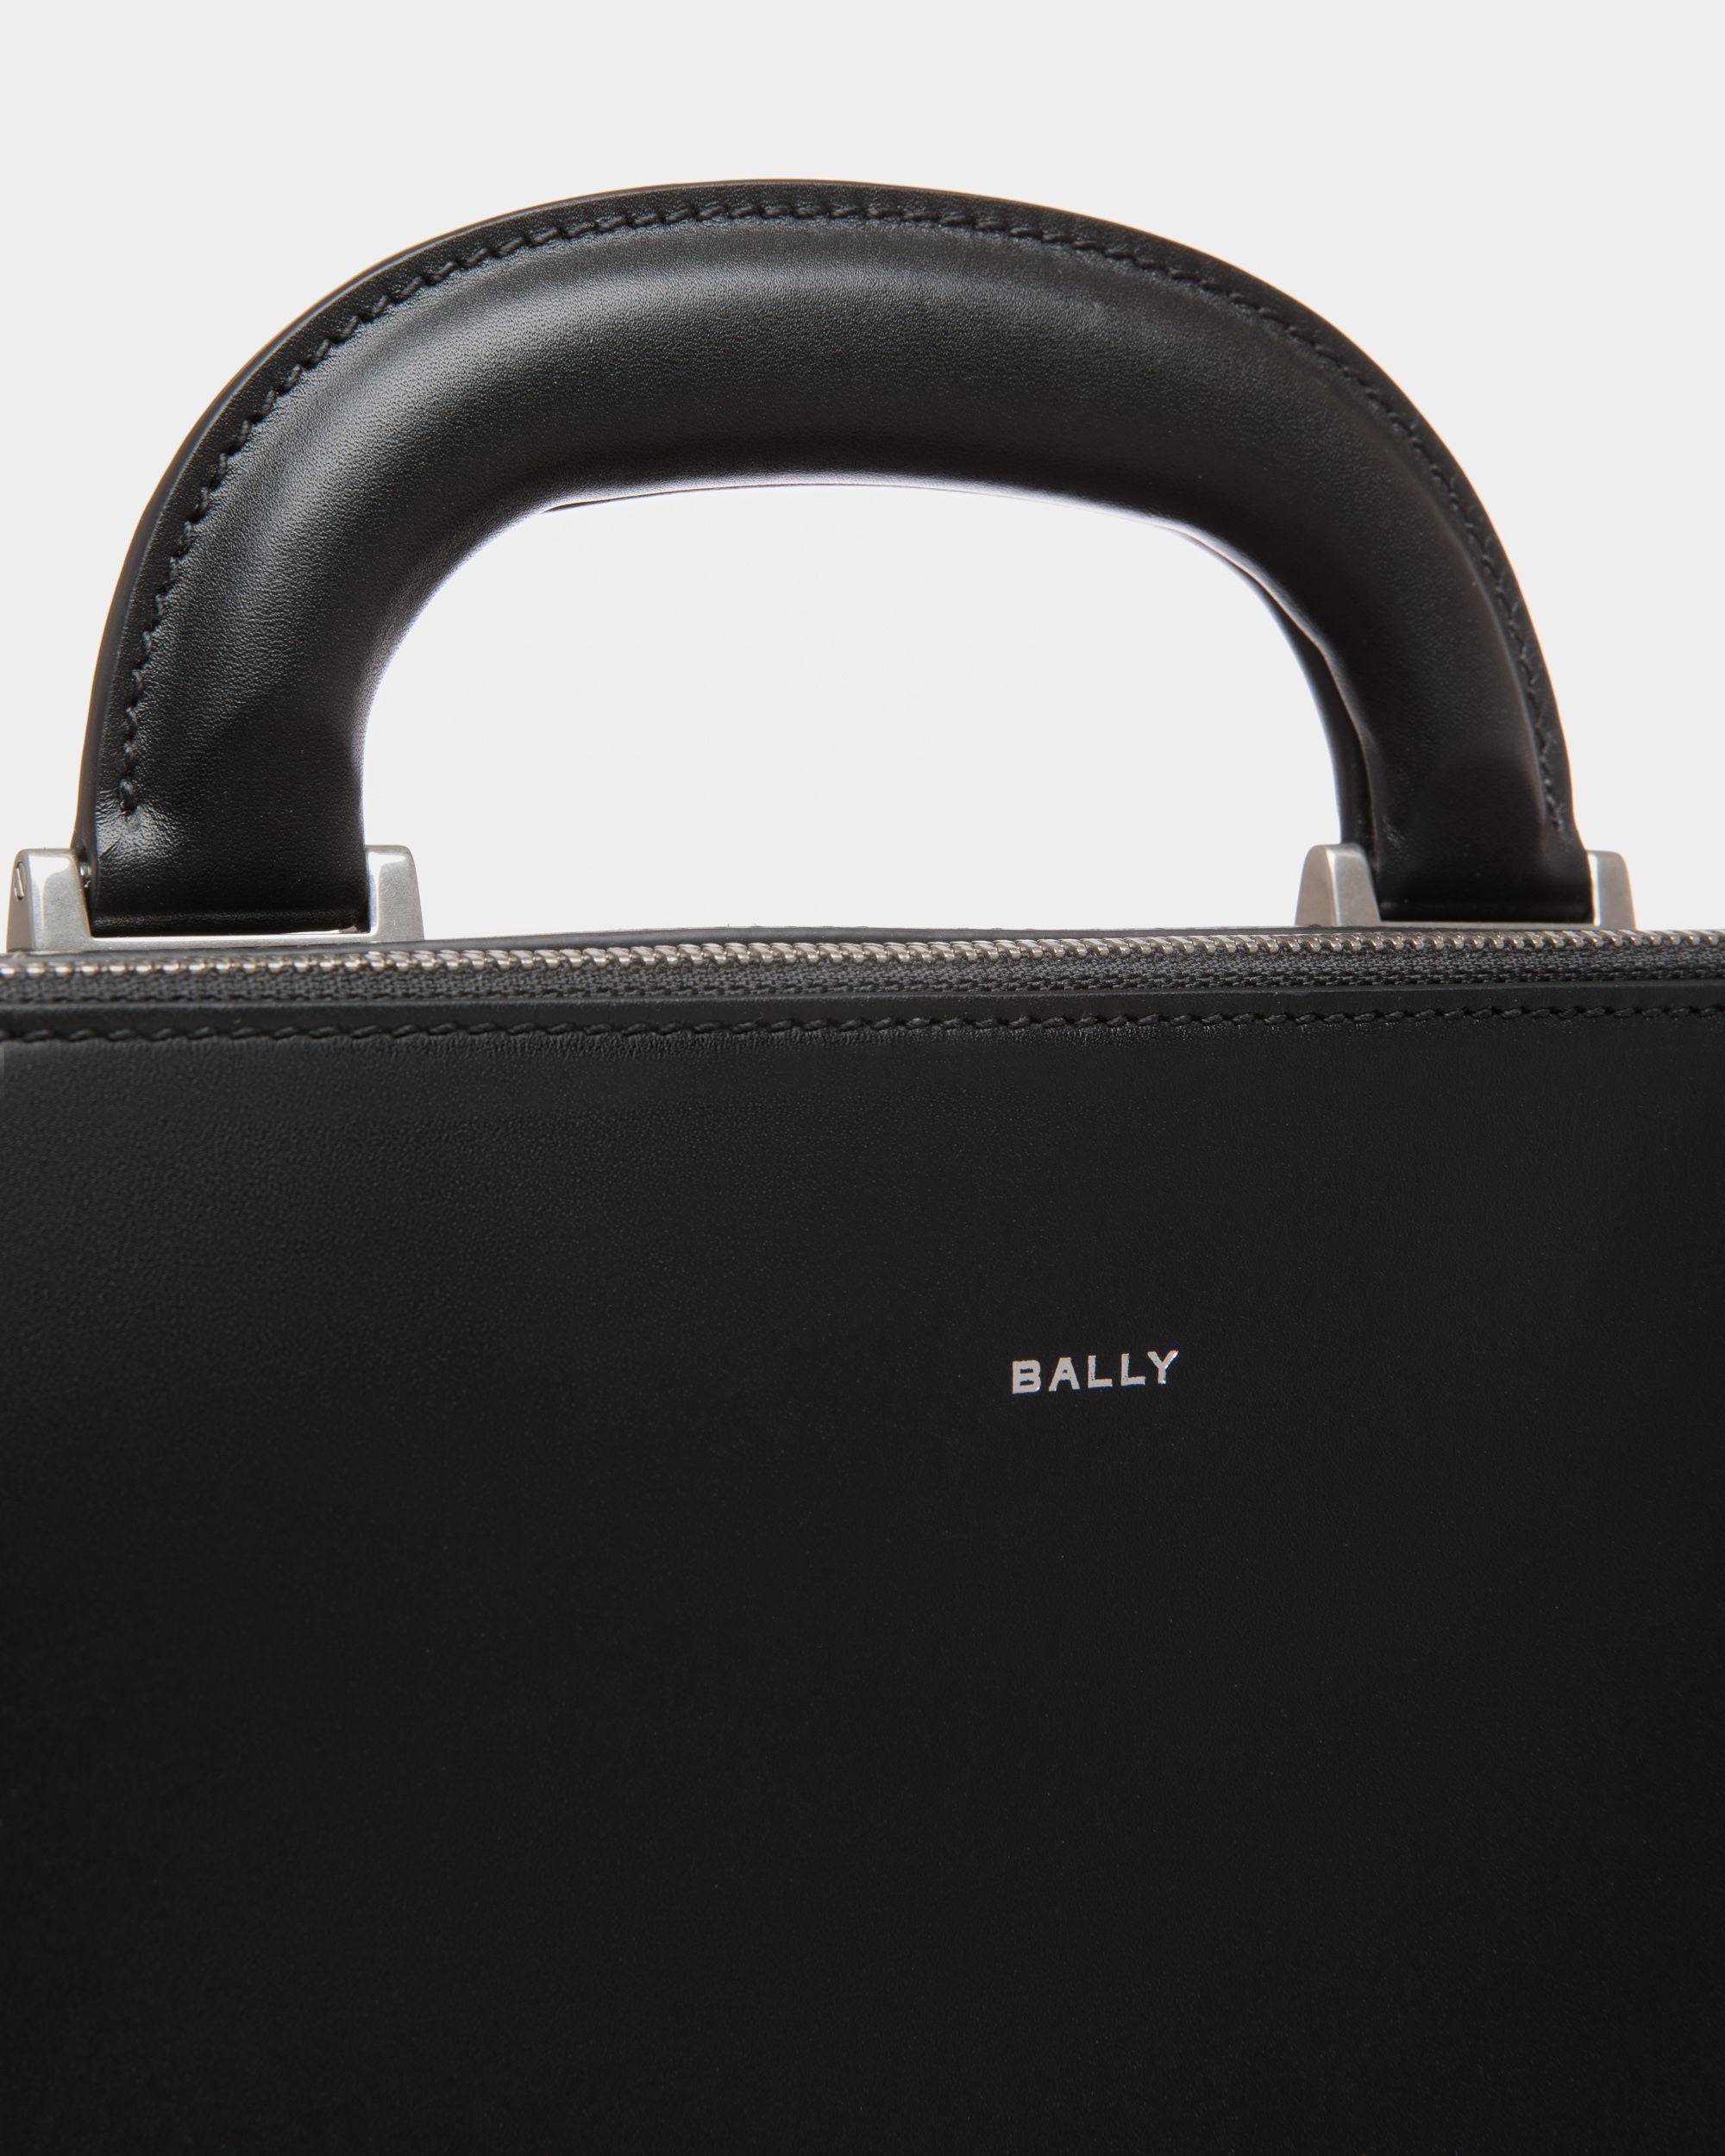 Busy Bally Briefcase in Black Leather - Men's - Bally - 05